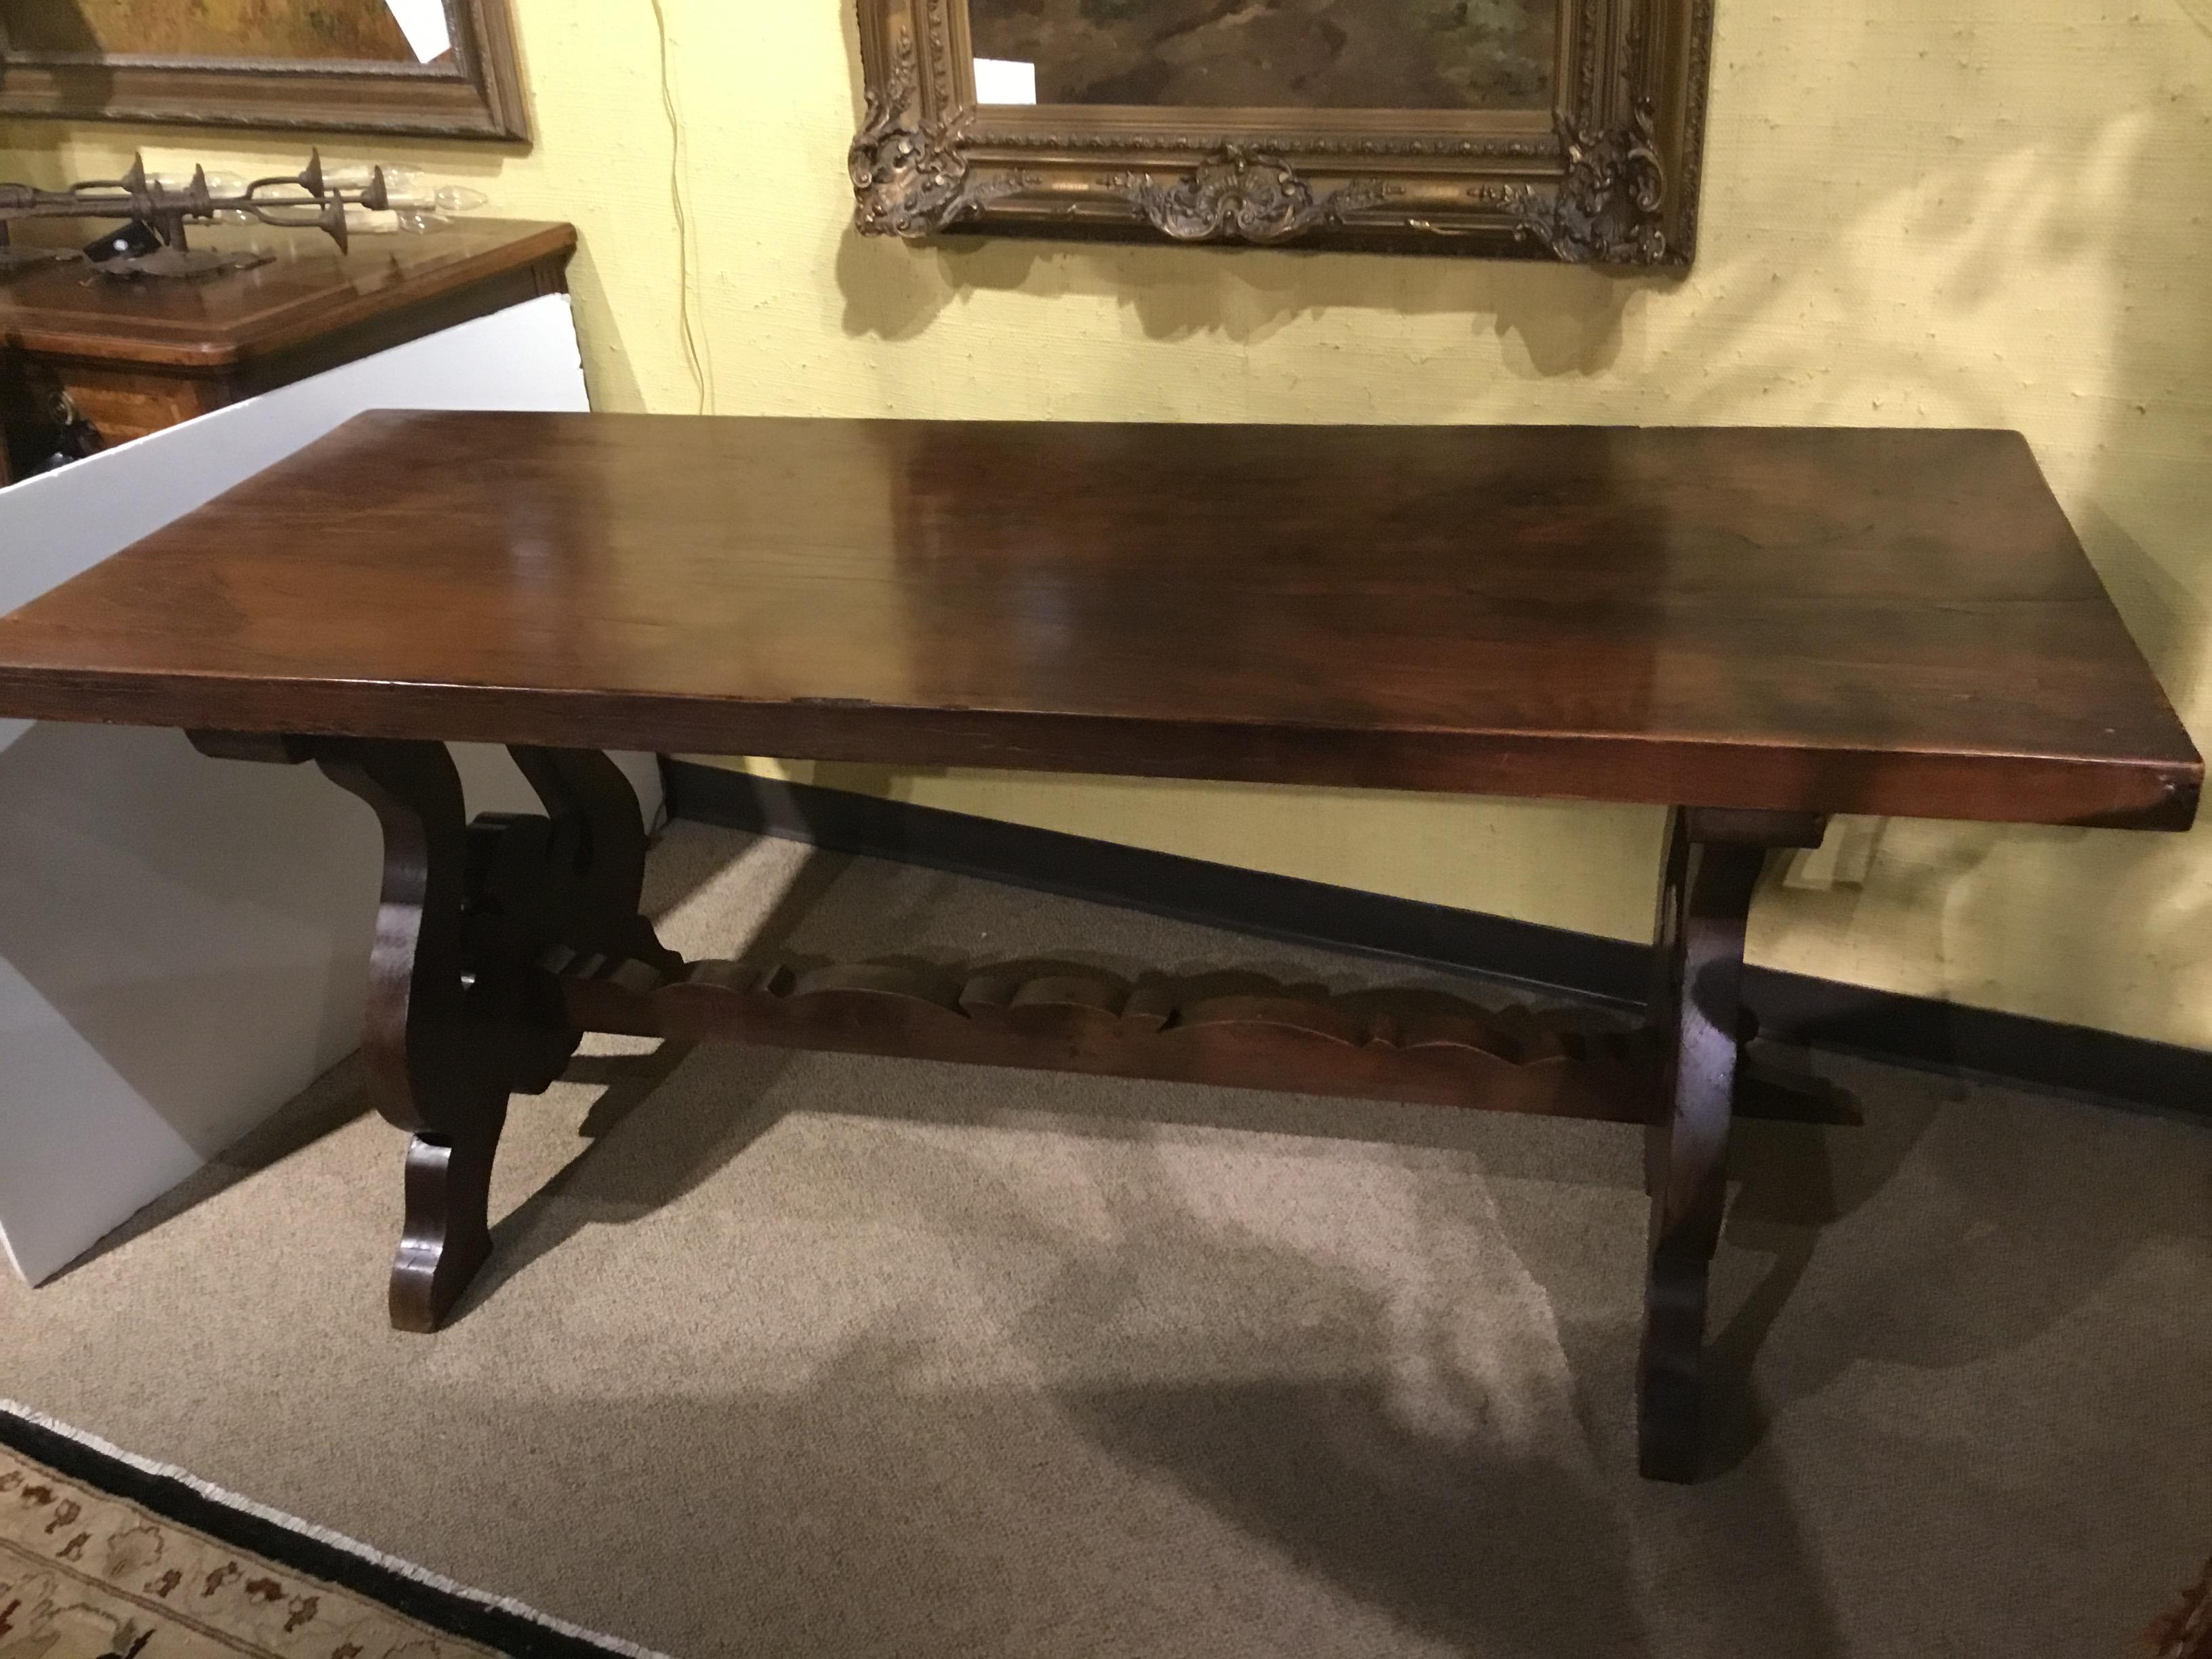 Handsome with a rustic quality. Very thick wooden top supported by ox bow shaped ends.
A carved stretcher with scalloped carving makes this table both sturdy and attractive.
Great piece for a ranch or cabin or any rustic home.